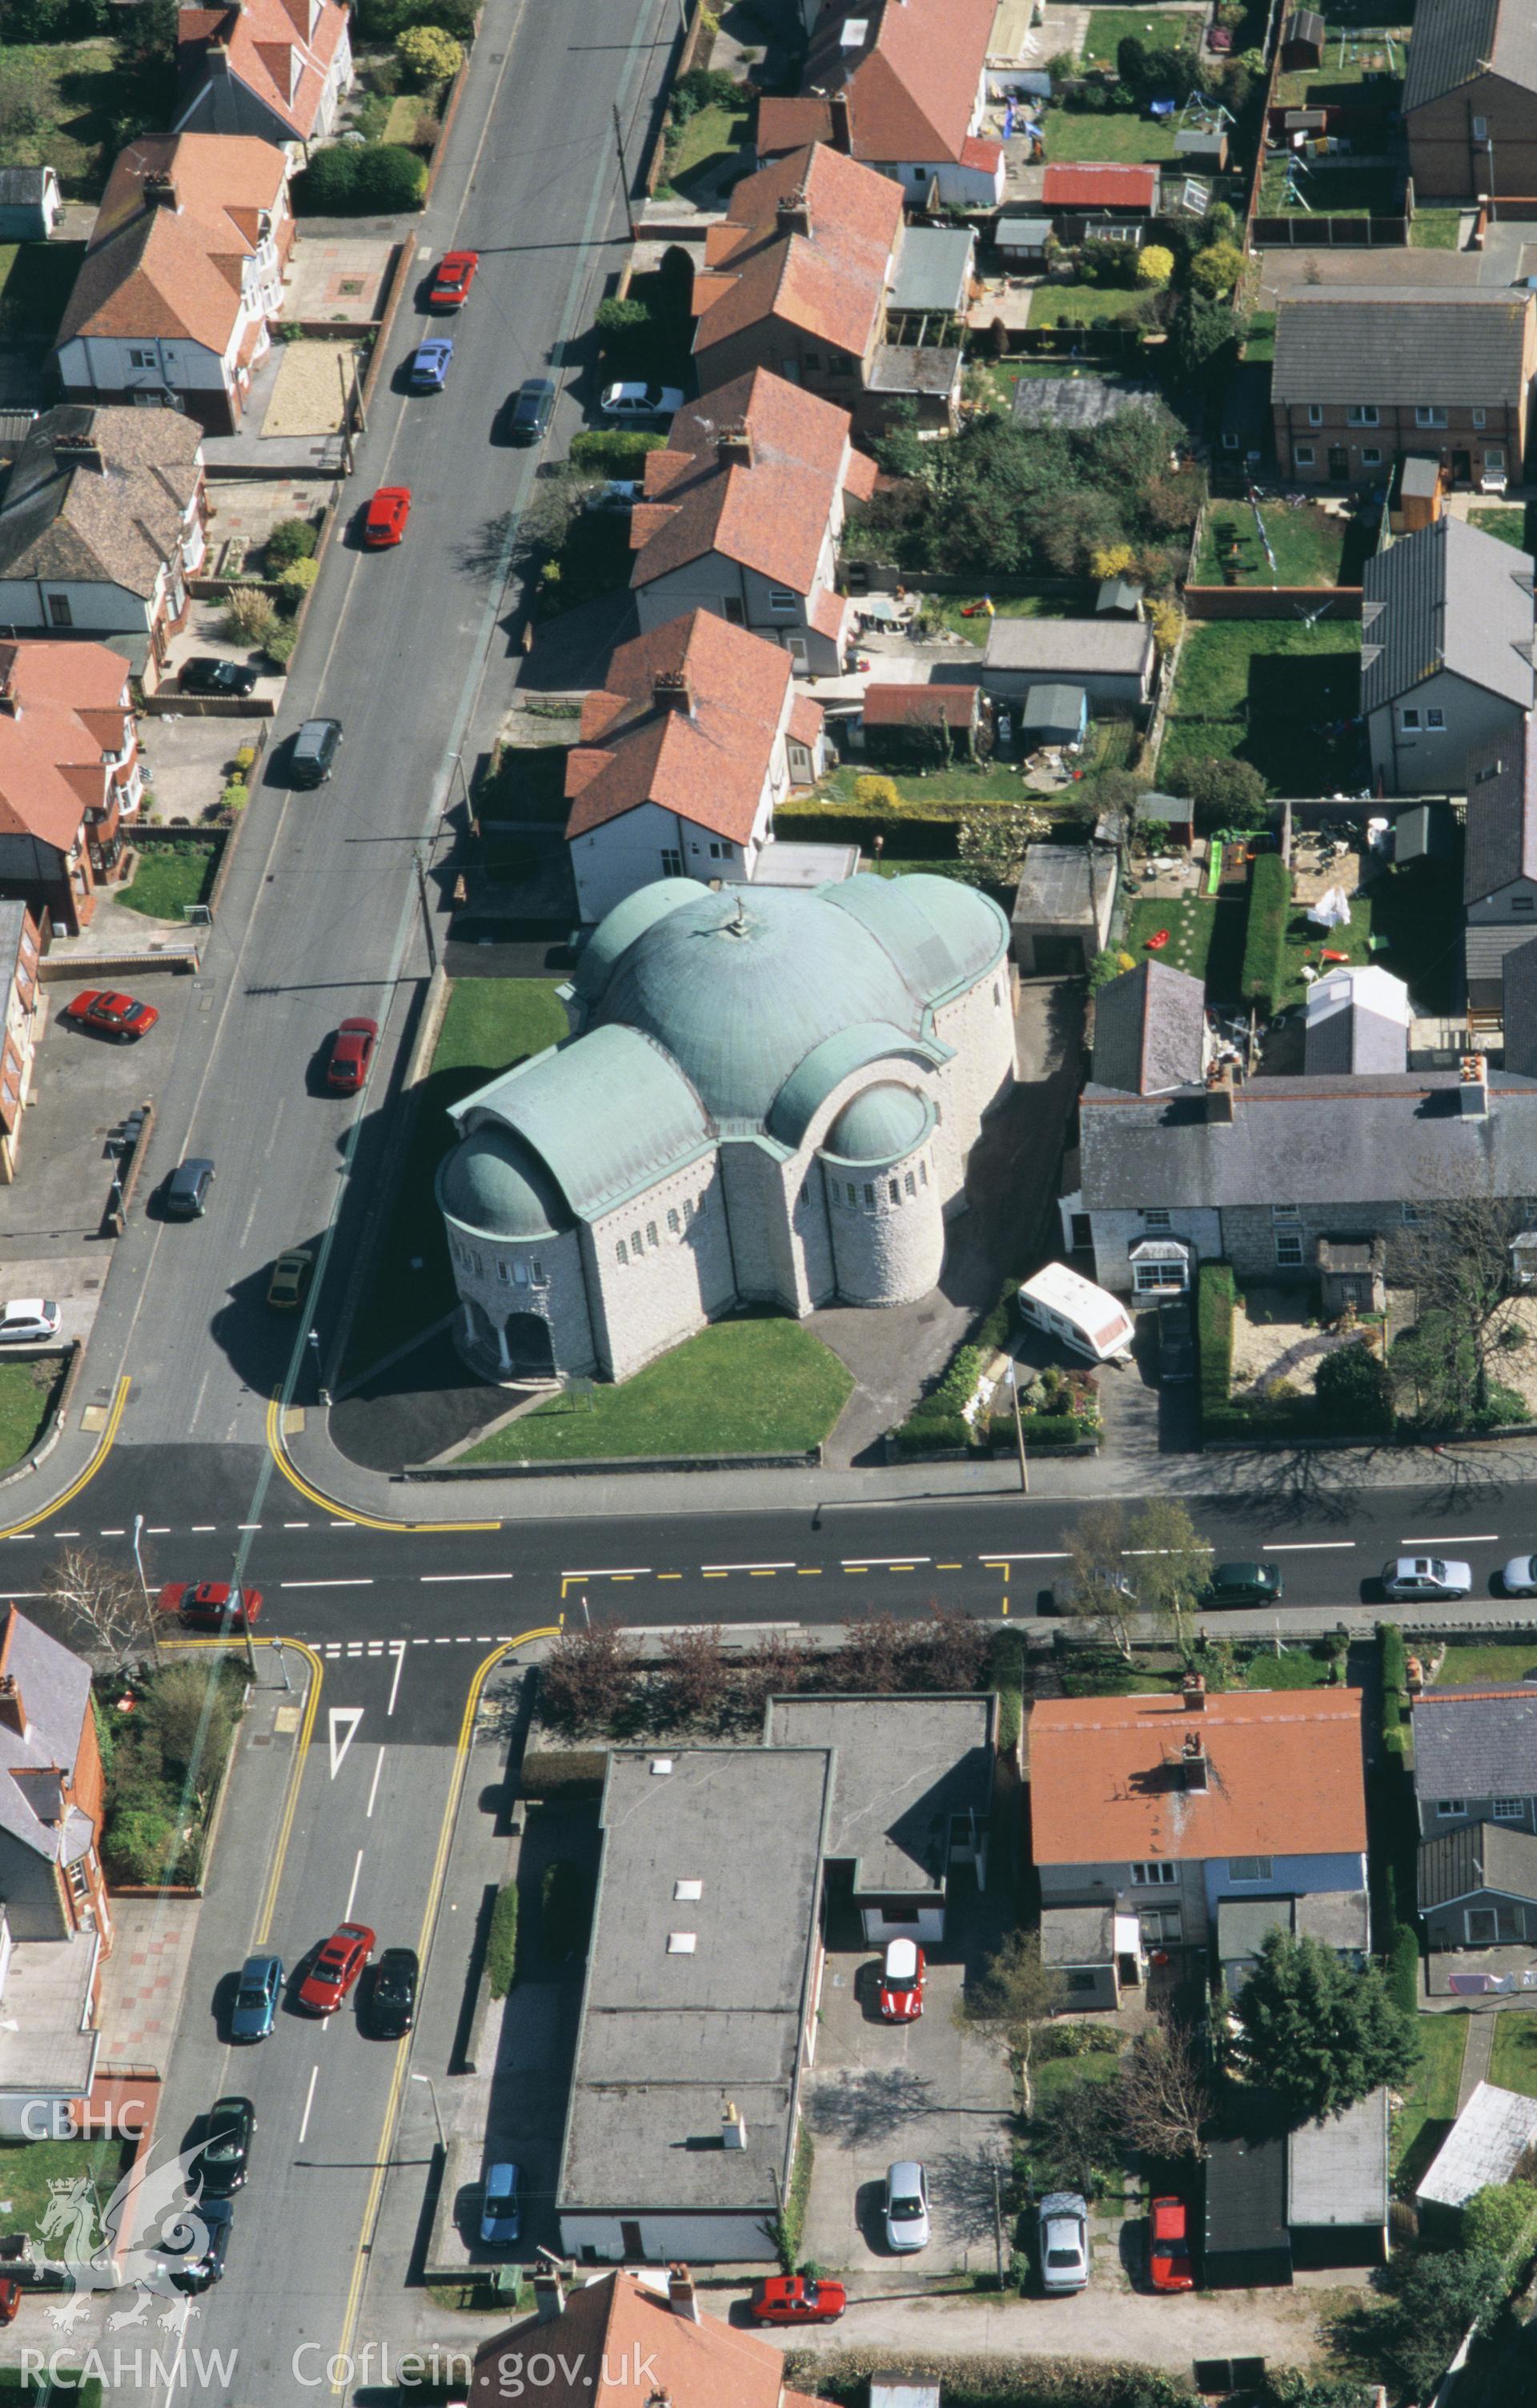 RCAHMW colour oblique aerial photograph of St. Teresa of Lisieux Catholic Church, Abergele, and housing. Taken by Toby Driver on 08/04/2003